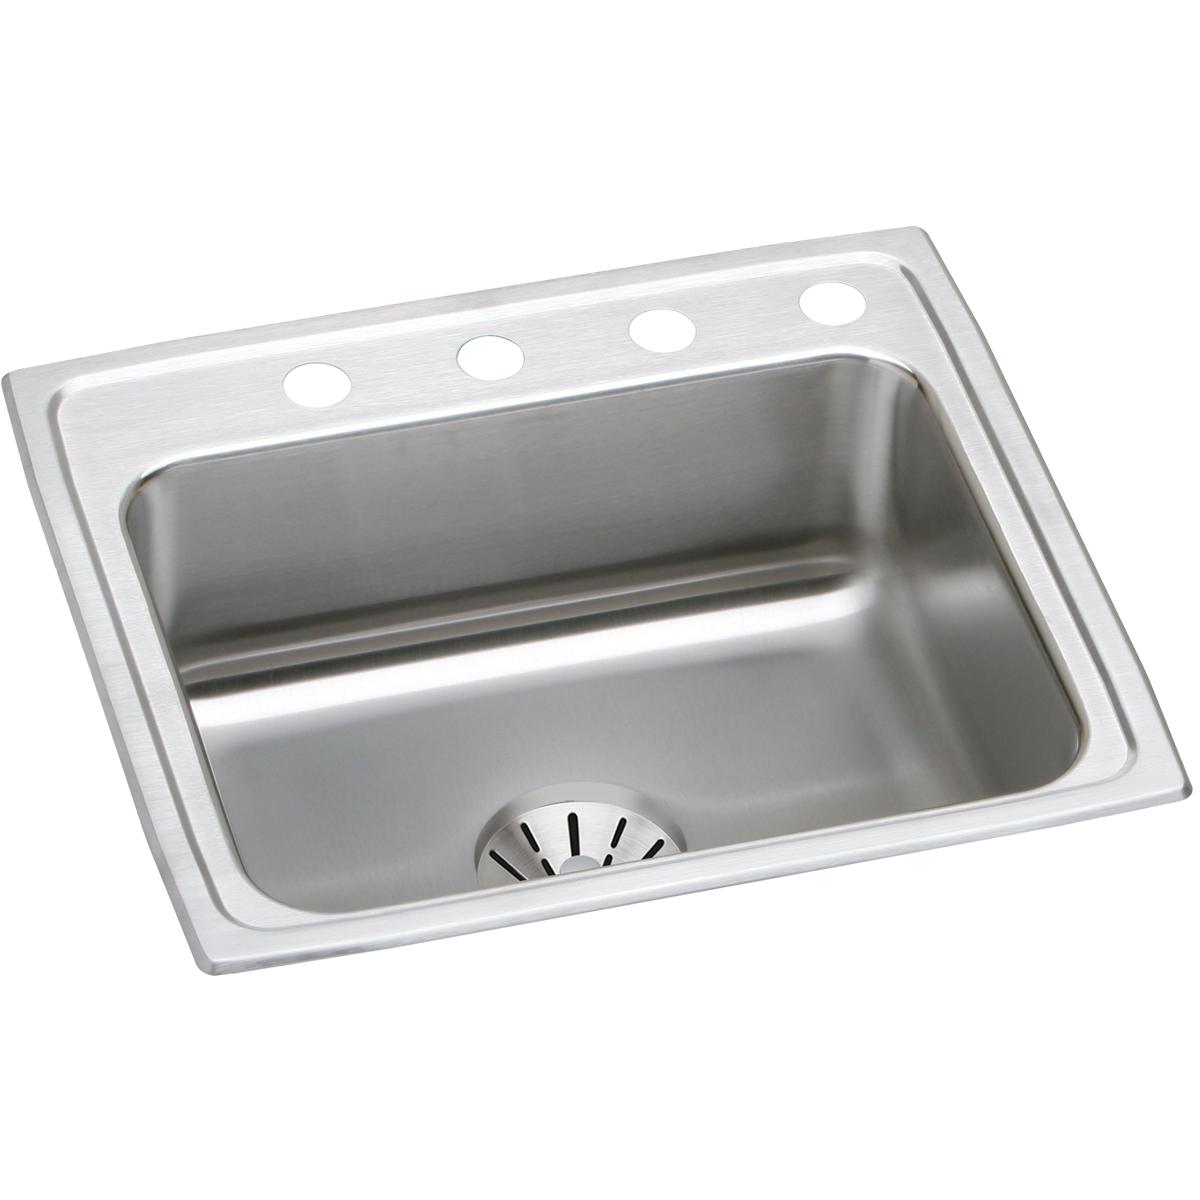 Elkay Lustertone Classic 22" x 19-1/2" x 10-1/8" Stainless Steel Single Bowl Drop-in Sink with Perfect Drain